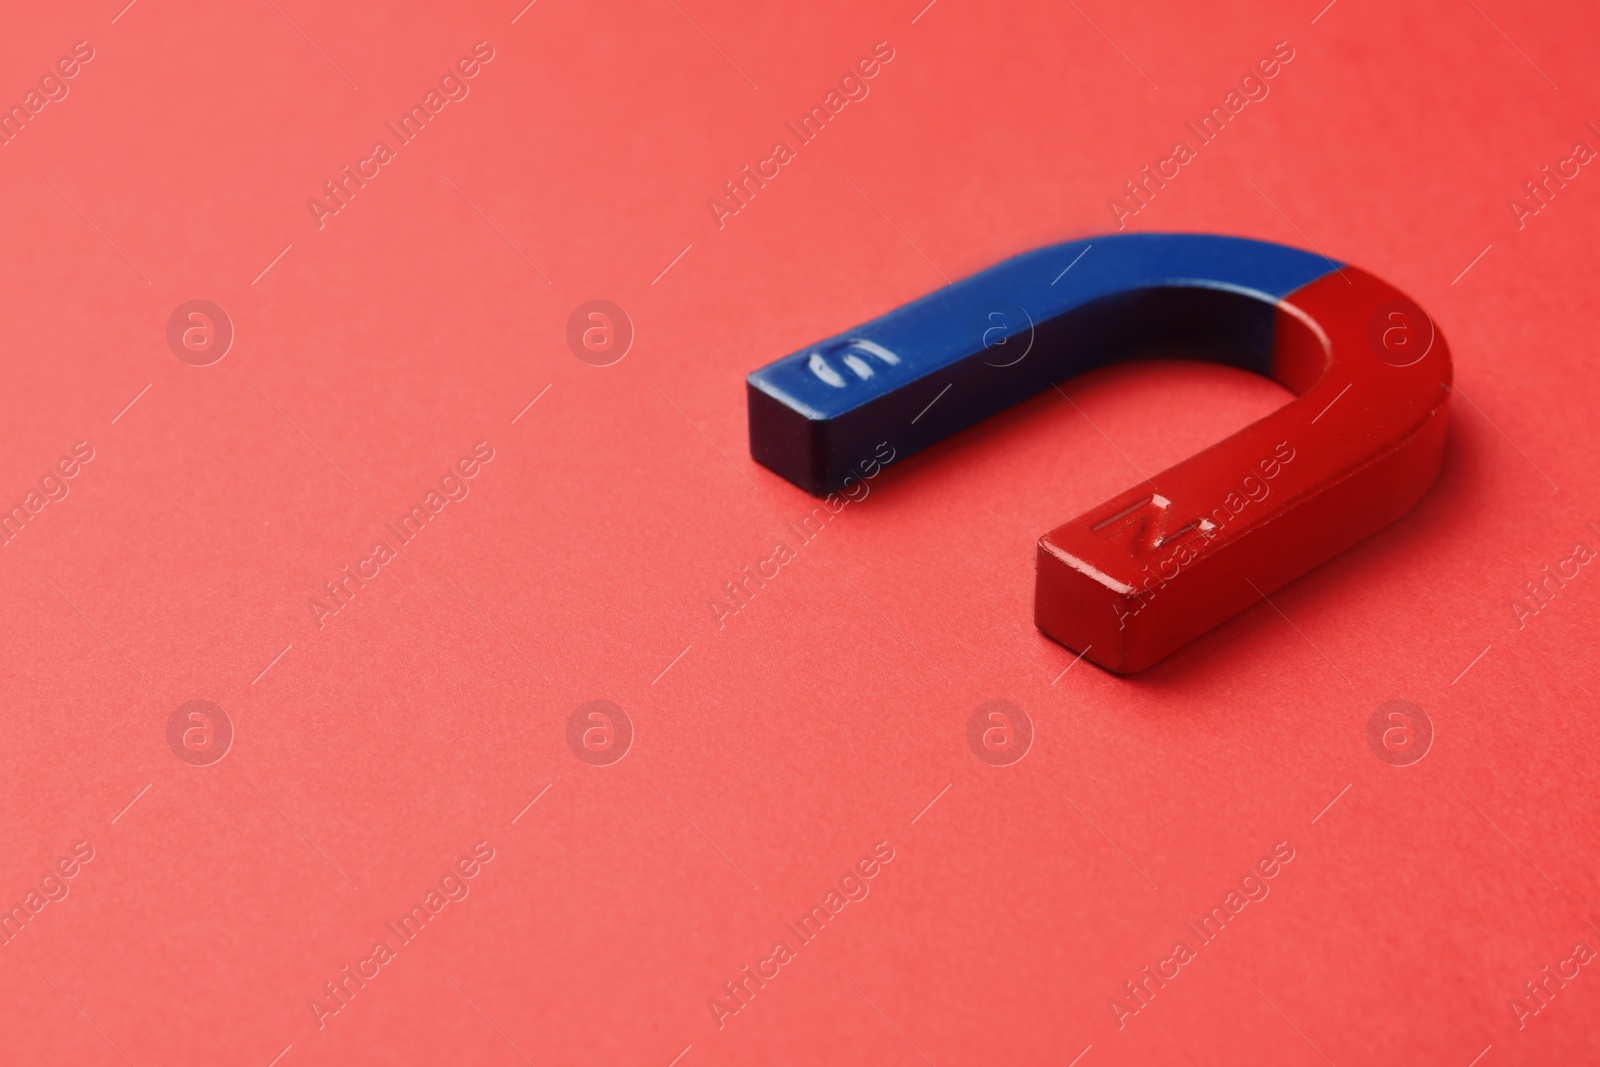 Photo of Red and blue horseshoe magnet on color background. Space for text